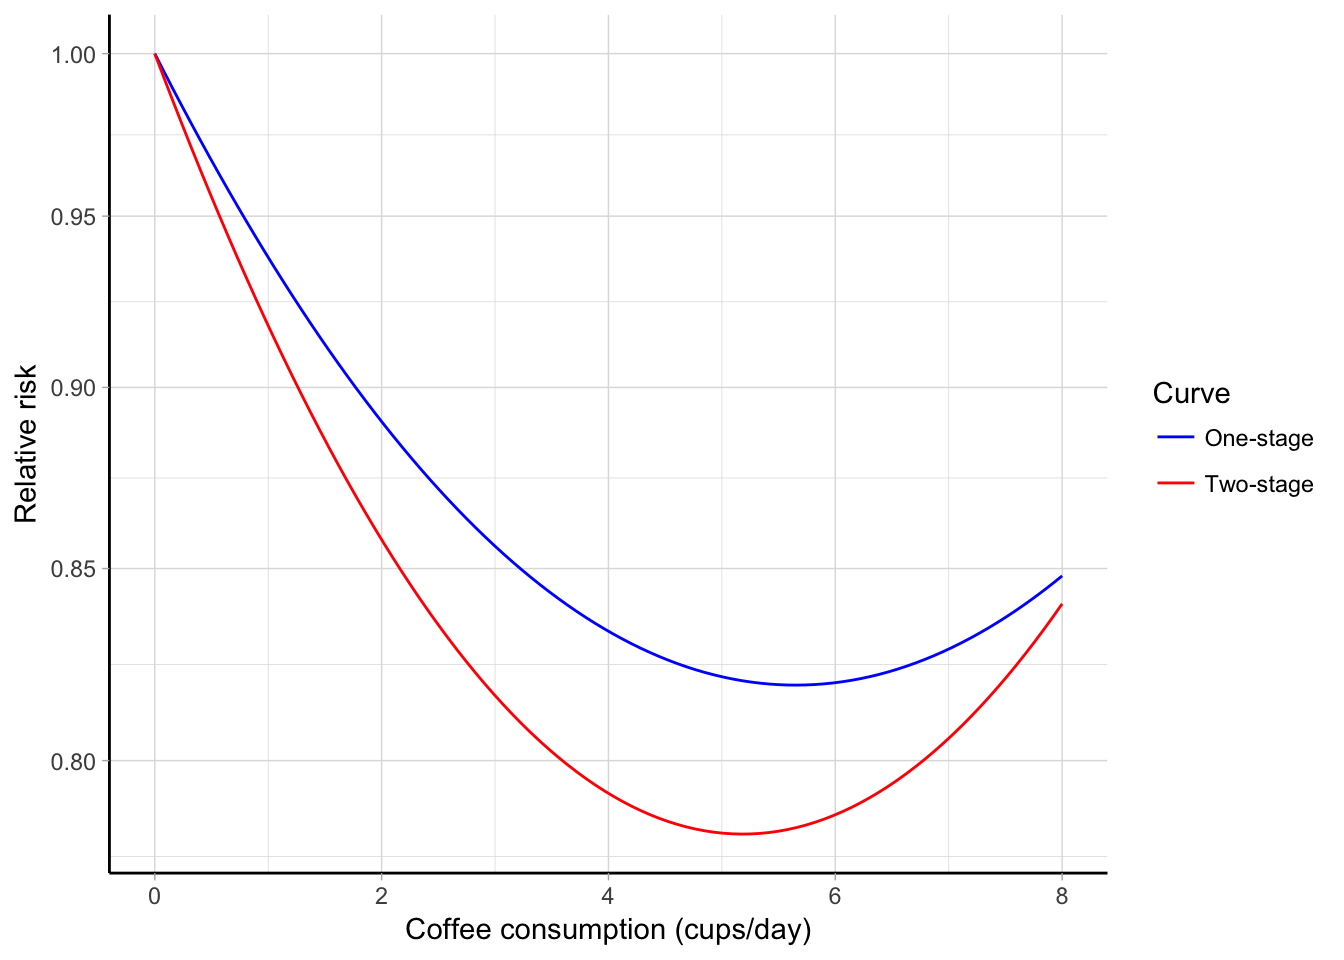 Combined quadratic association between coffee consumption (cups/day) and all-cause mortality estimated using a one-stage (blue line) and two-stage (red line) approach. The predicted relative risks are plotted on the log scale using 0 cups/day as referent.